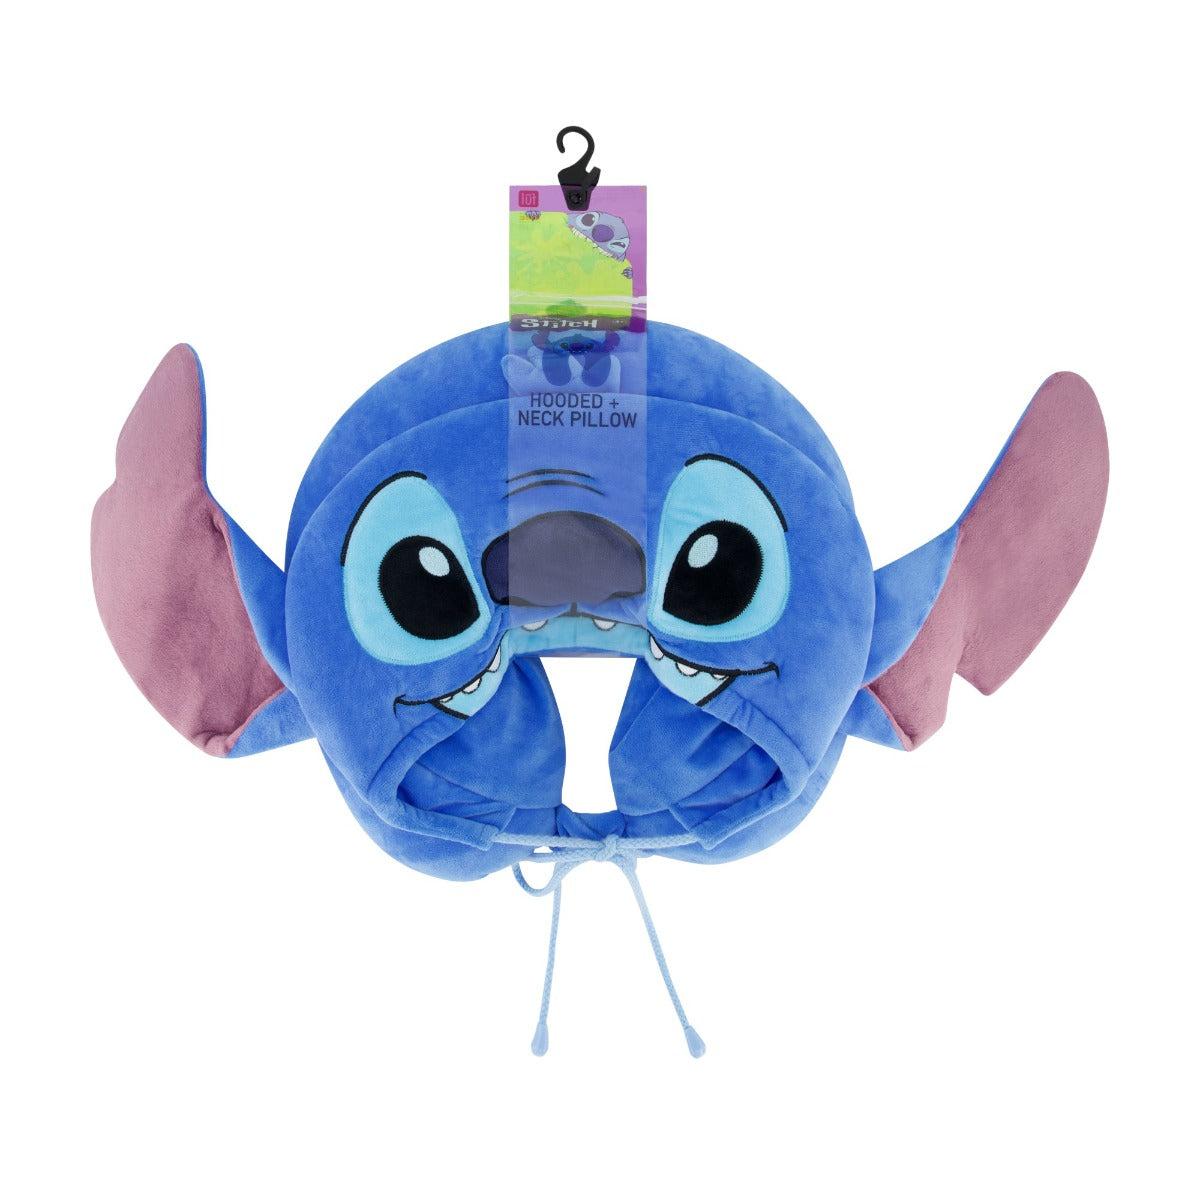 Blue Ful Disney Stitch hooded travel pillow - bet hoodie neck pillows for adults and kids